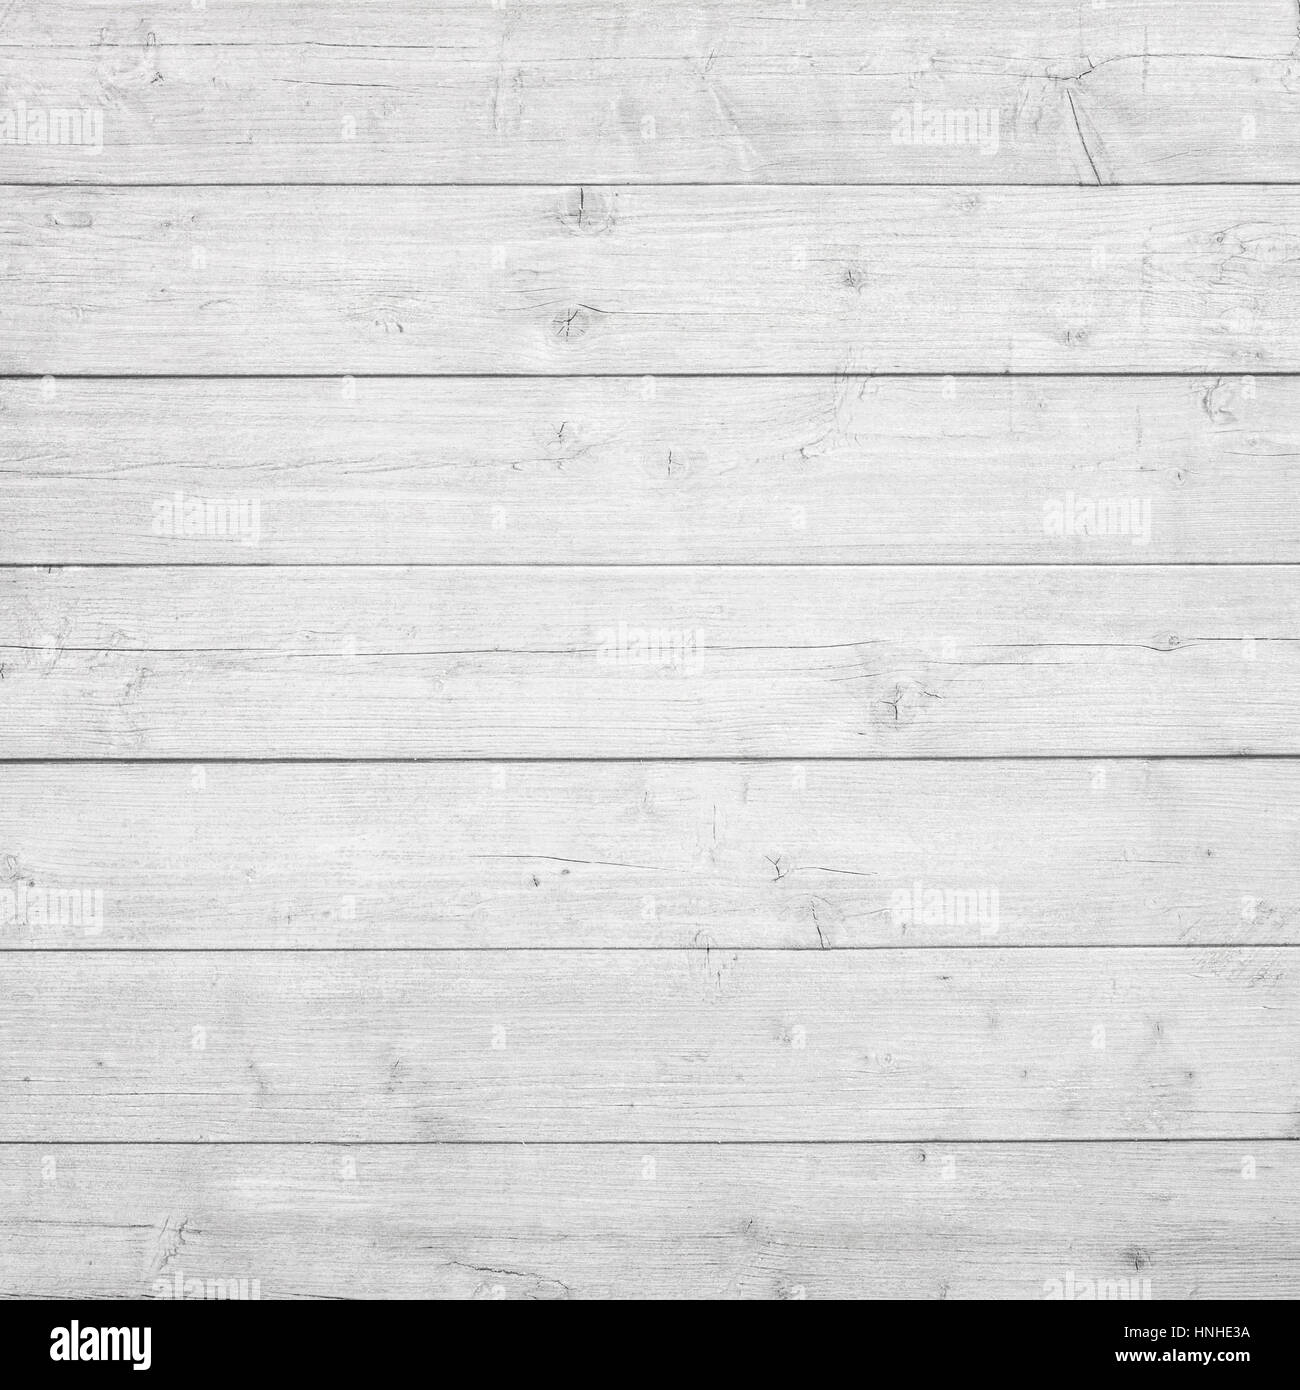 White wooden planks, tabletop, floor surface or wall. Stock Photo